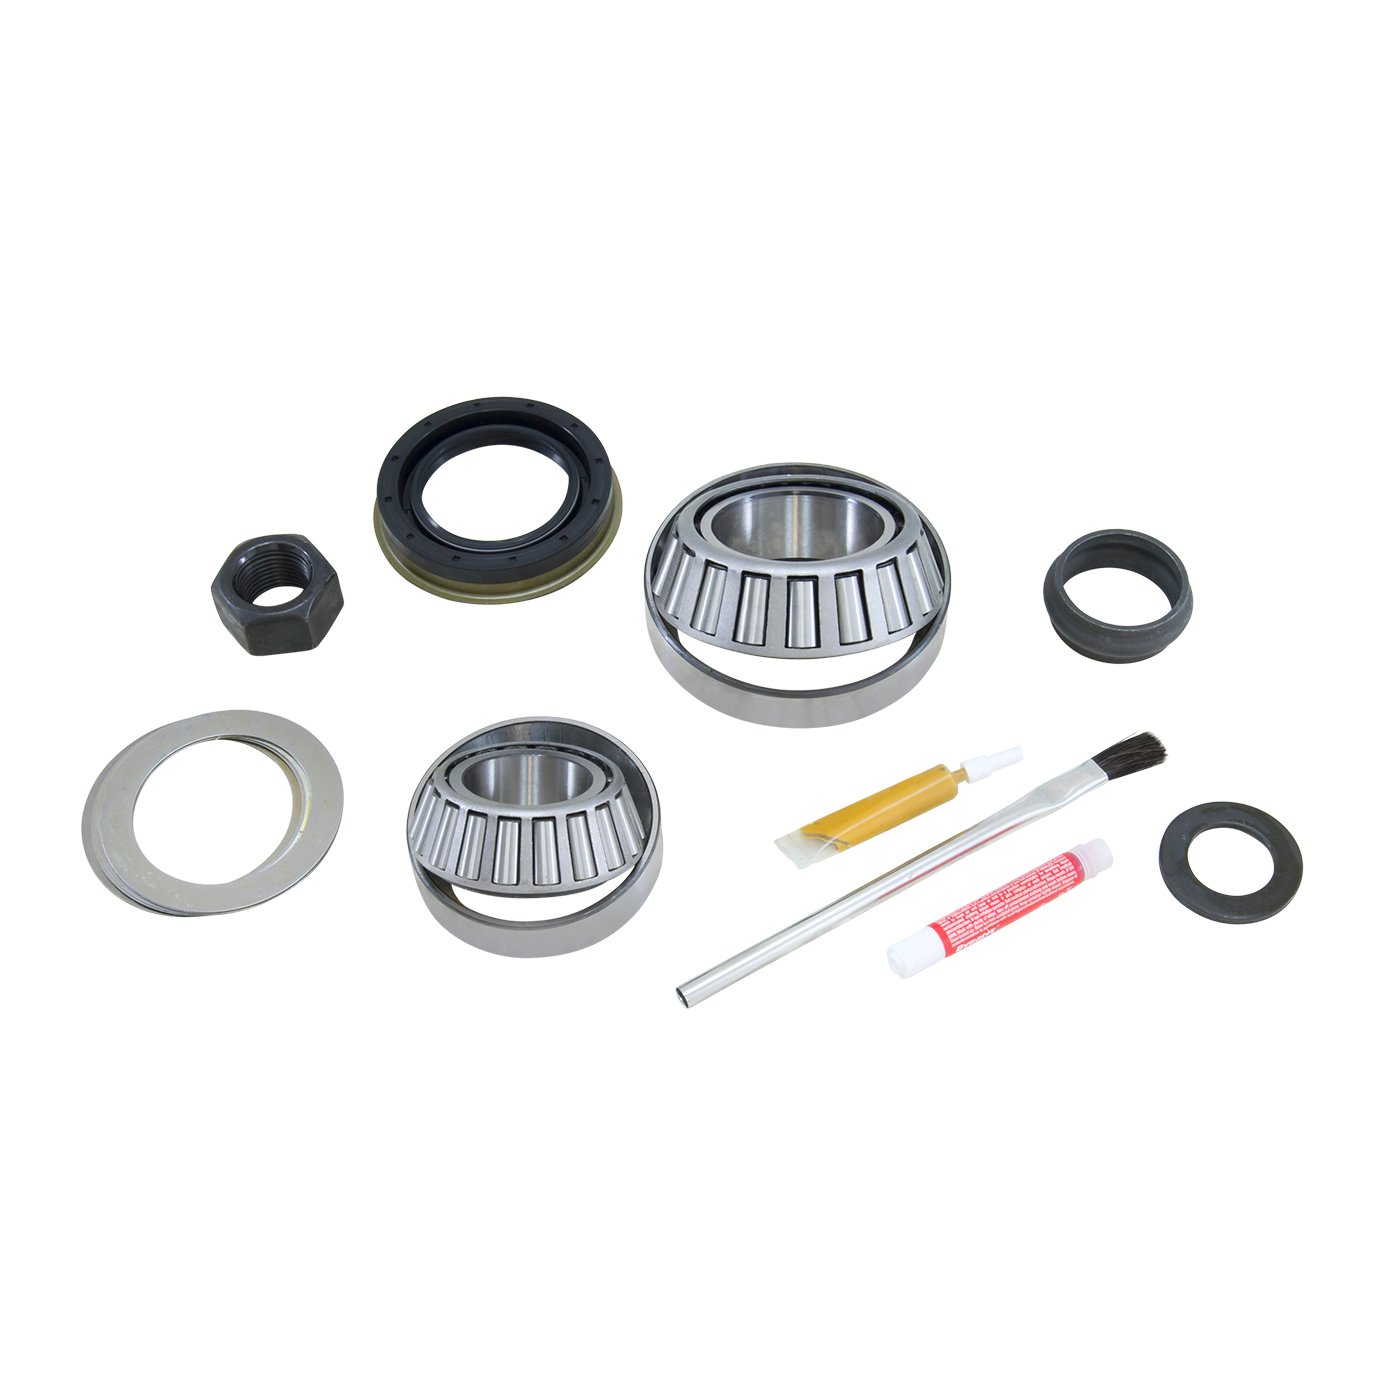 Pinion Install Kit For '76 And Newer Chrysler